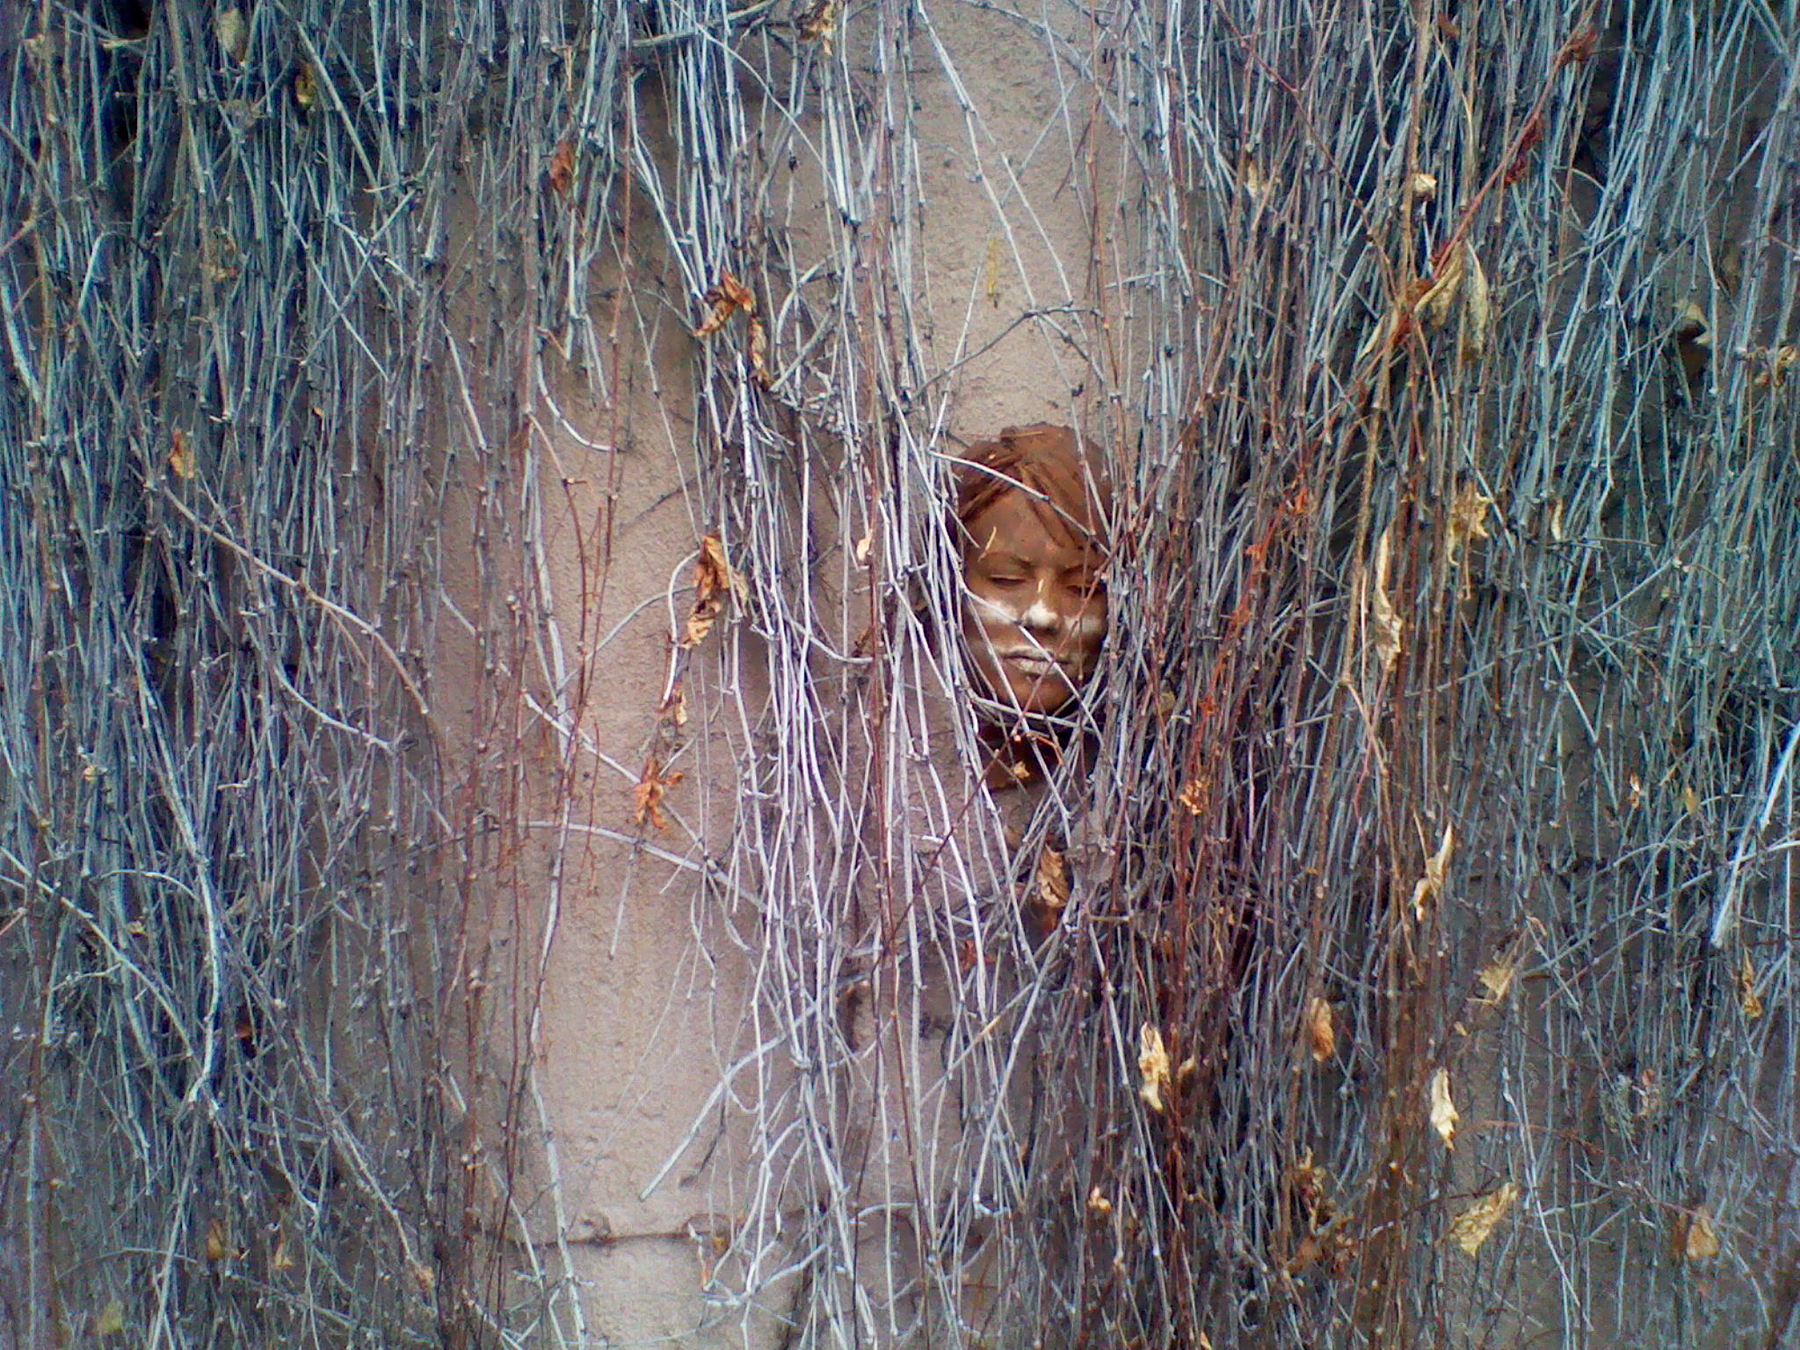 The Face hidden along the Cherry Creek Trail in Denver. Image courtesy of The Impossible Winterbourne.